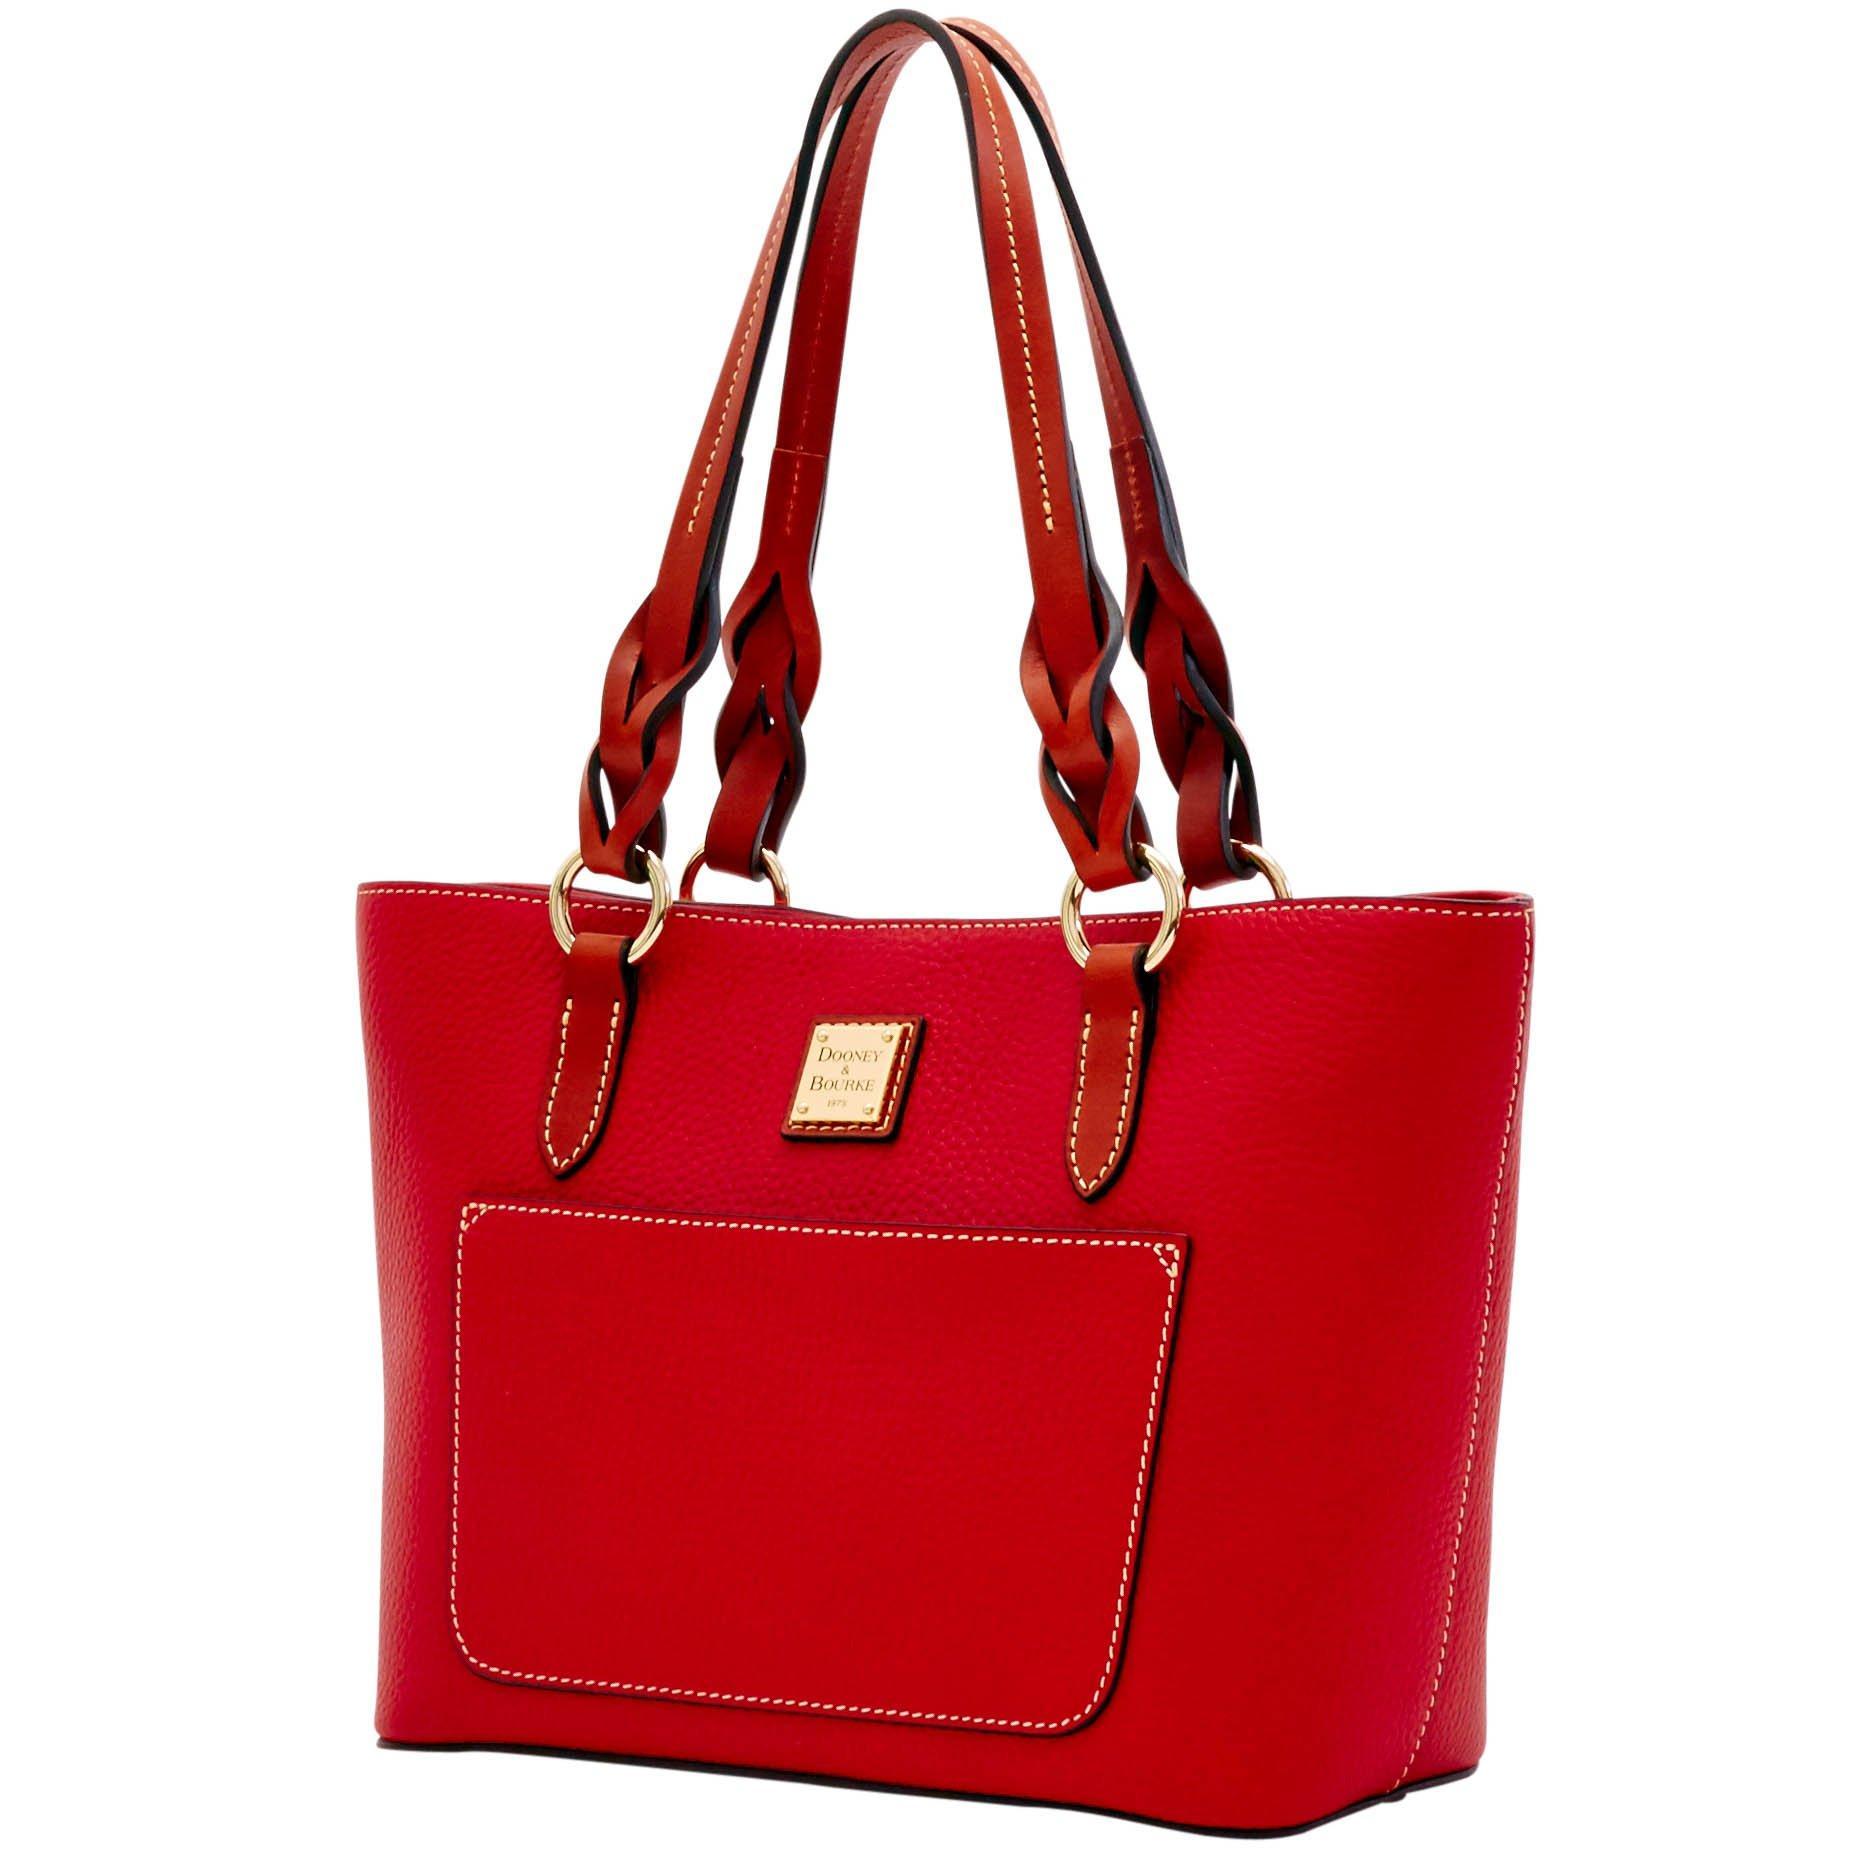 Dooney & Bourke Leather Pebble Grain Tammy Tote in Red - Lyst